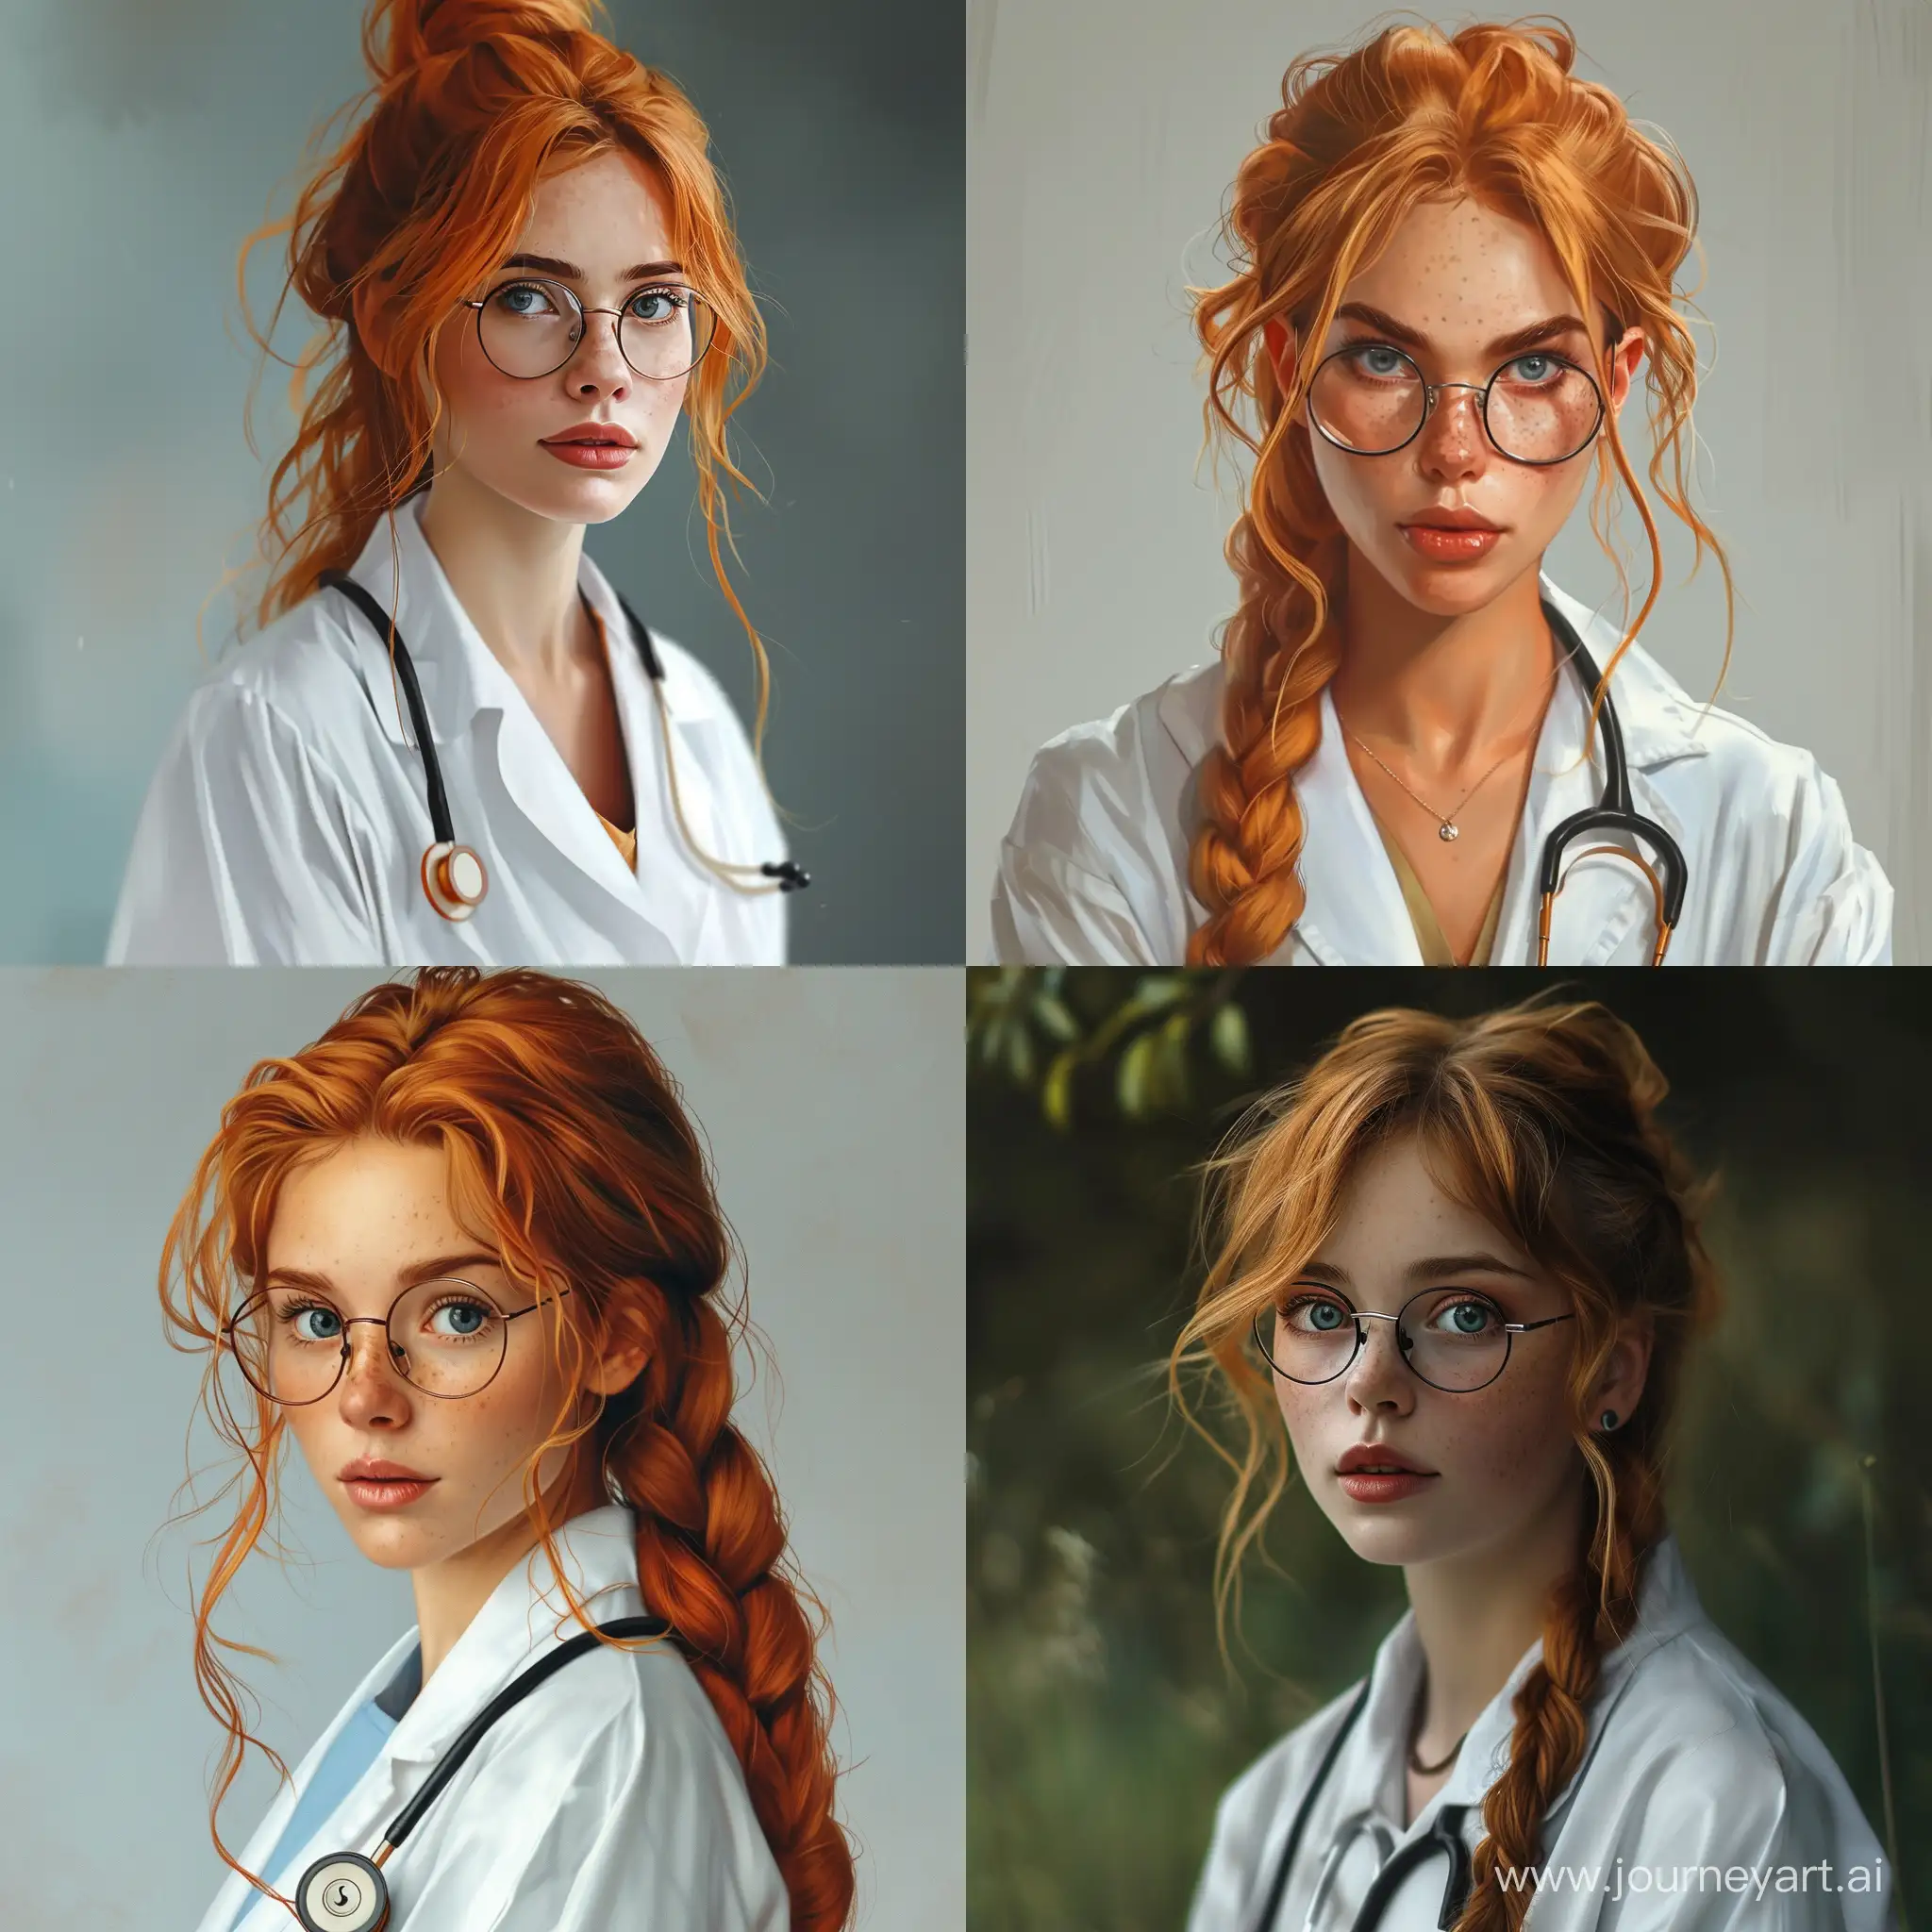 Realistic-Redhead-Girl-Doctor-Wearing-Glasses